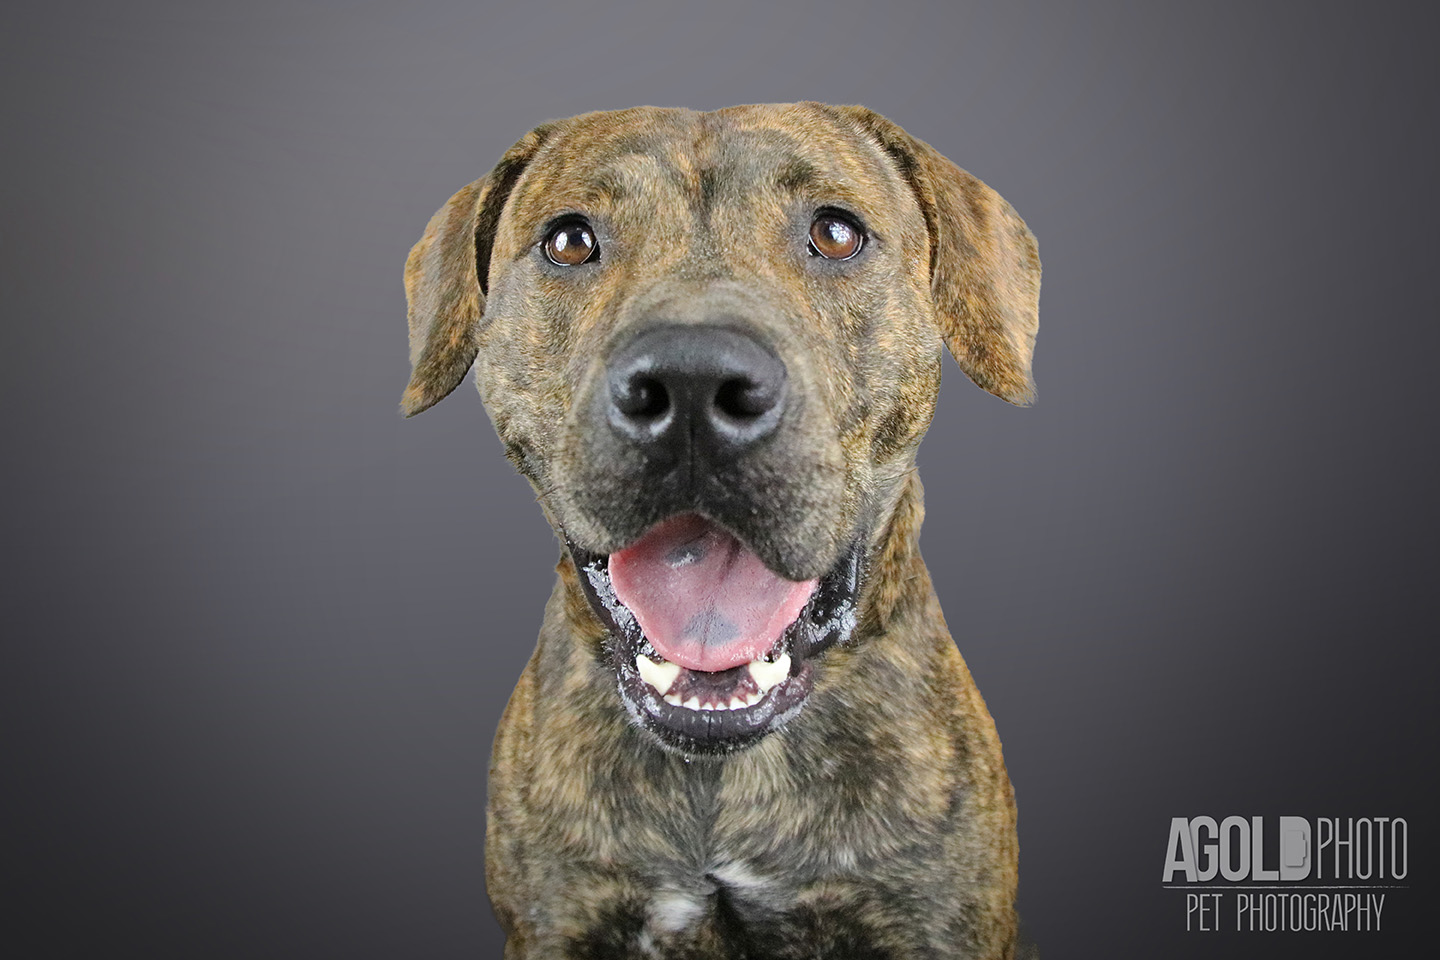 handsome_agoldphoto-tampa-pet-photography__agoldphoto-tampa-pet-photography_